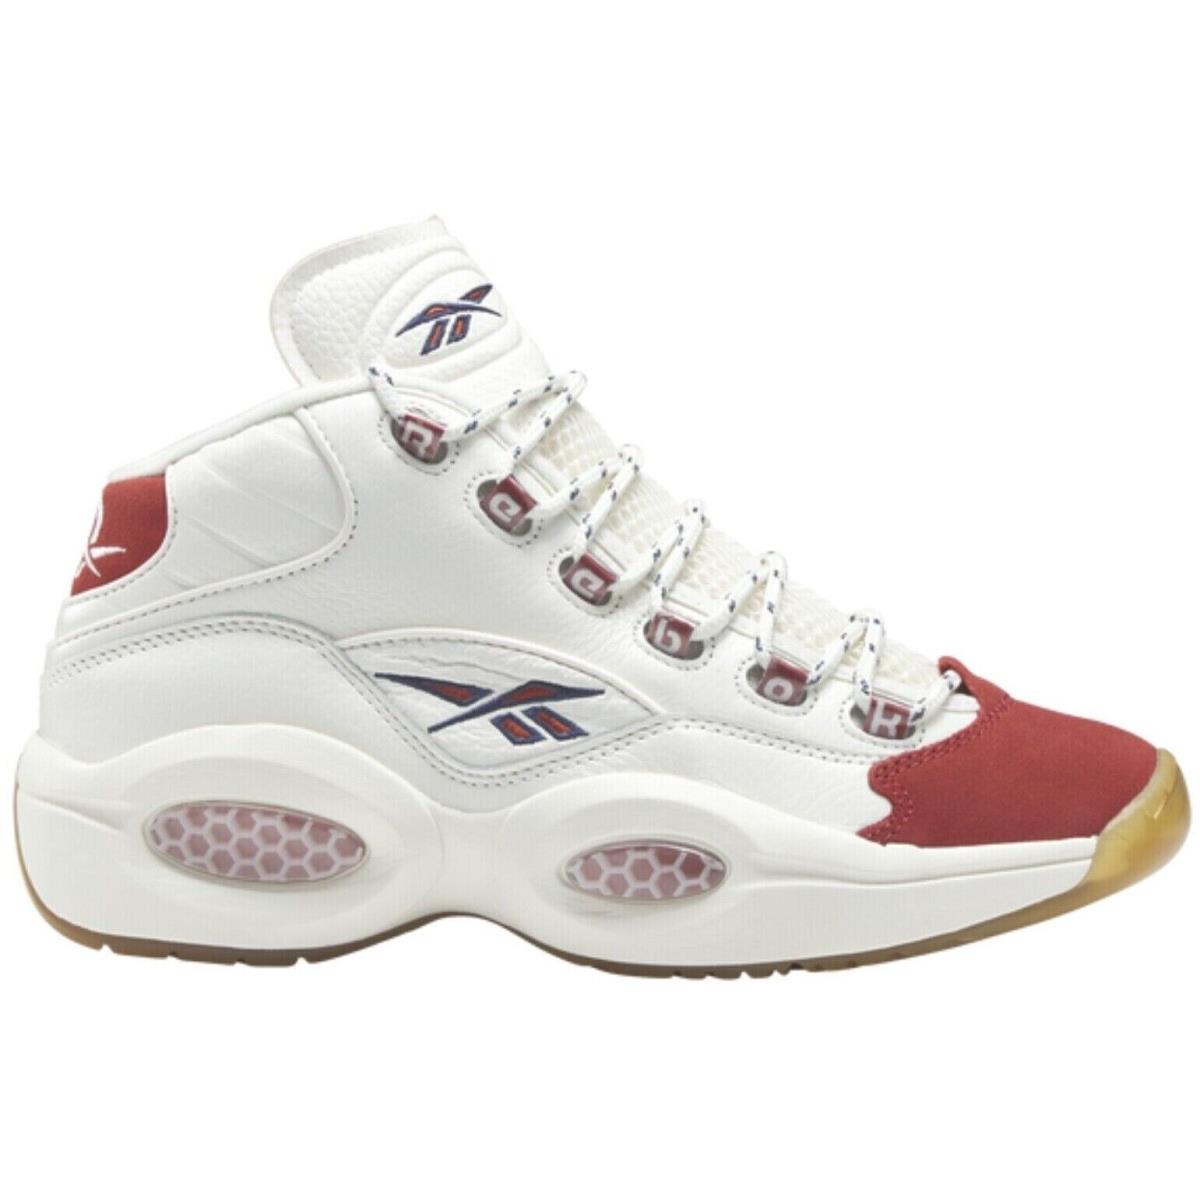 Reebok Question Mid Men`s Basketball Shoes All Colors US Sizes 7-14 White / Red